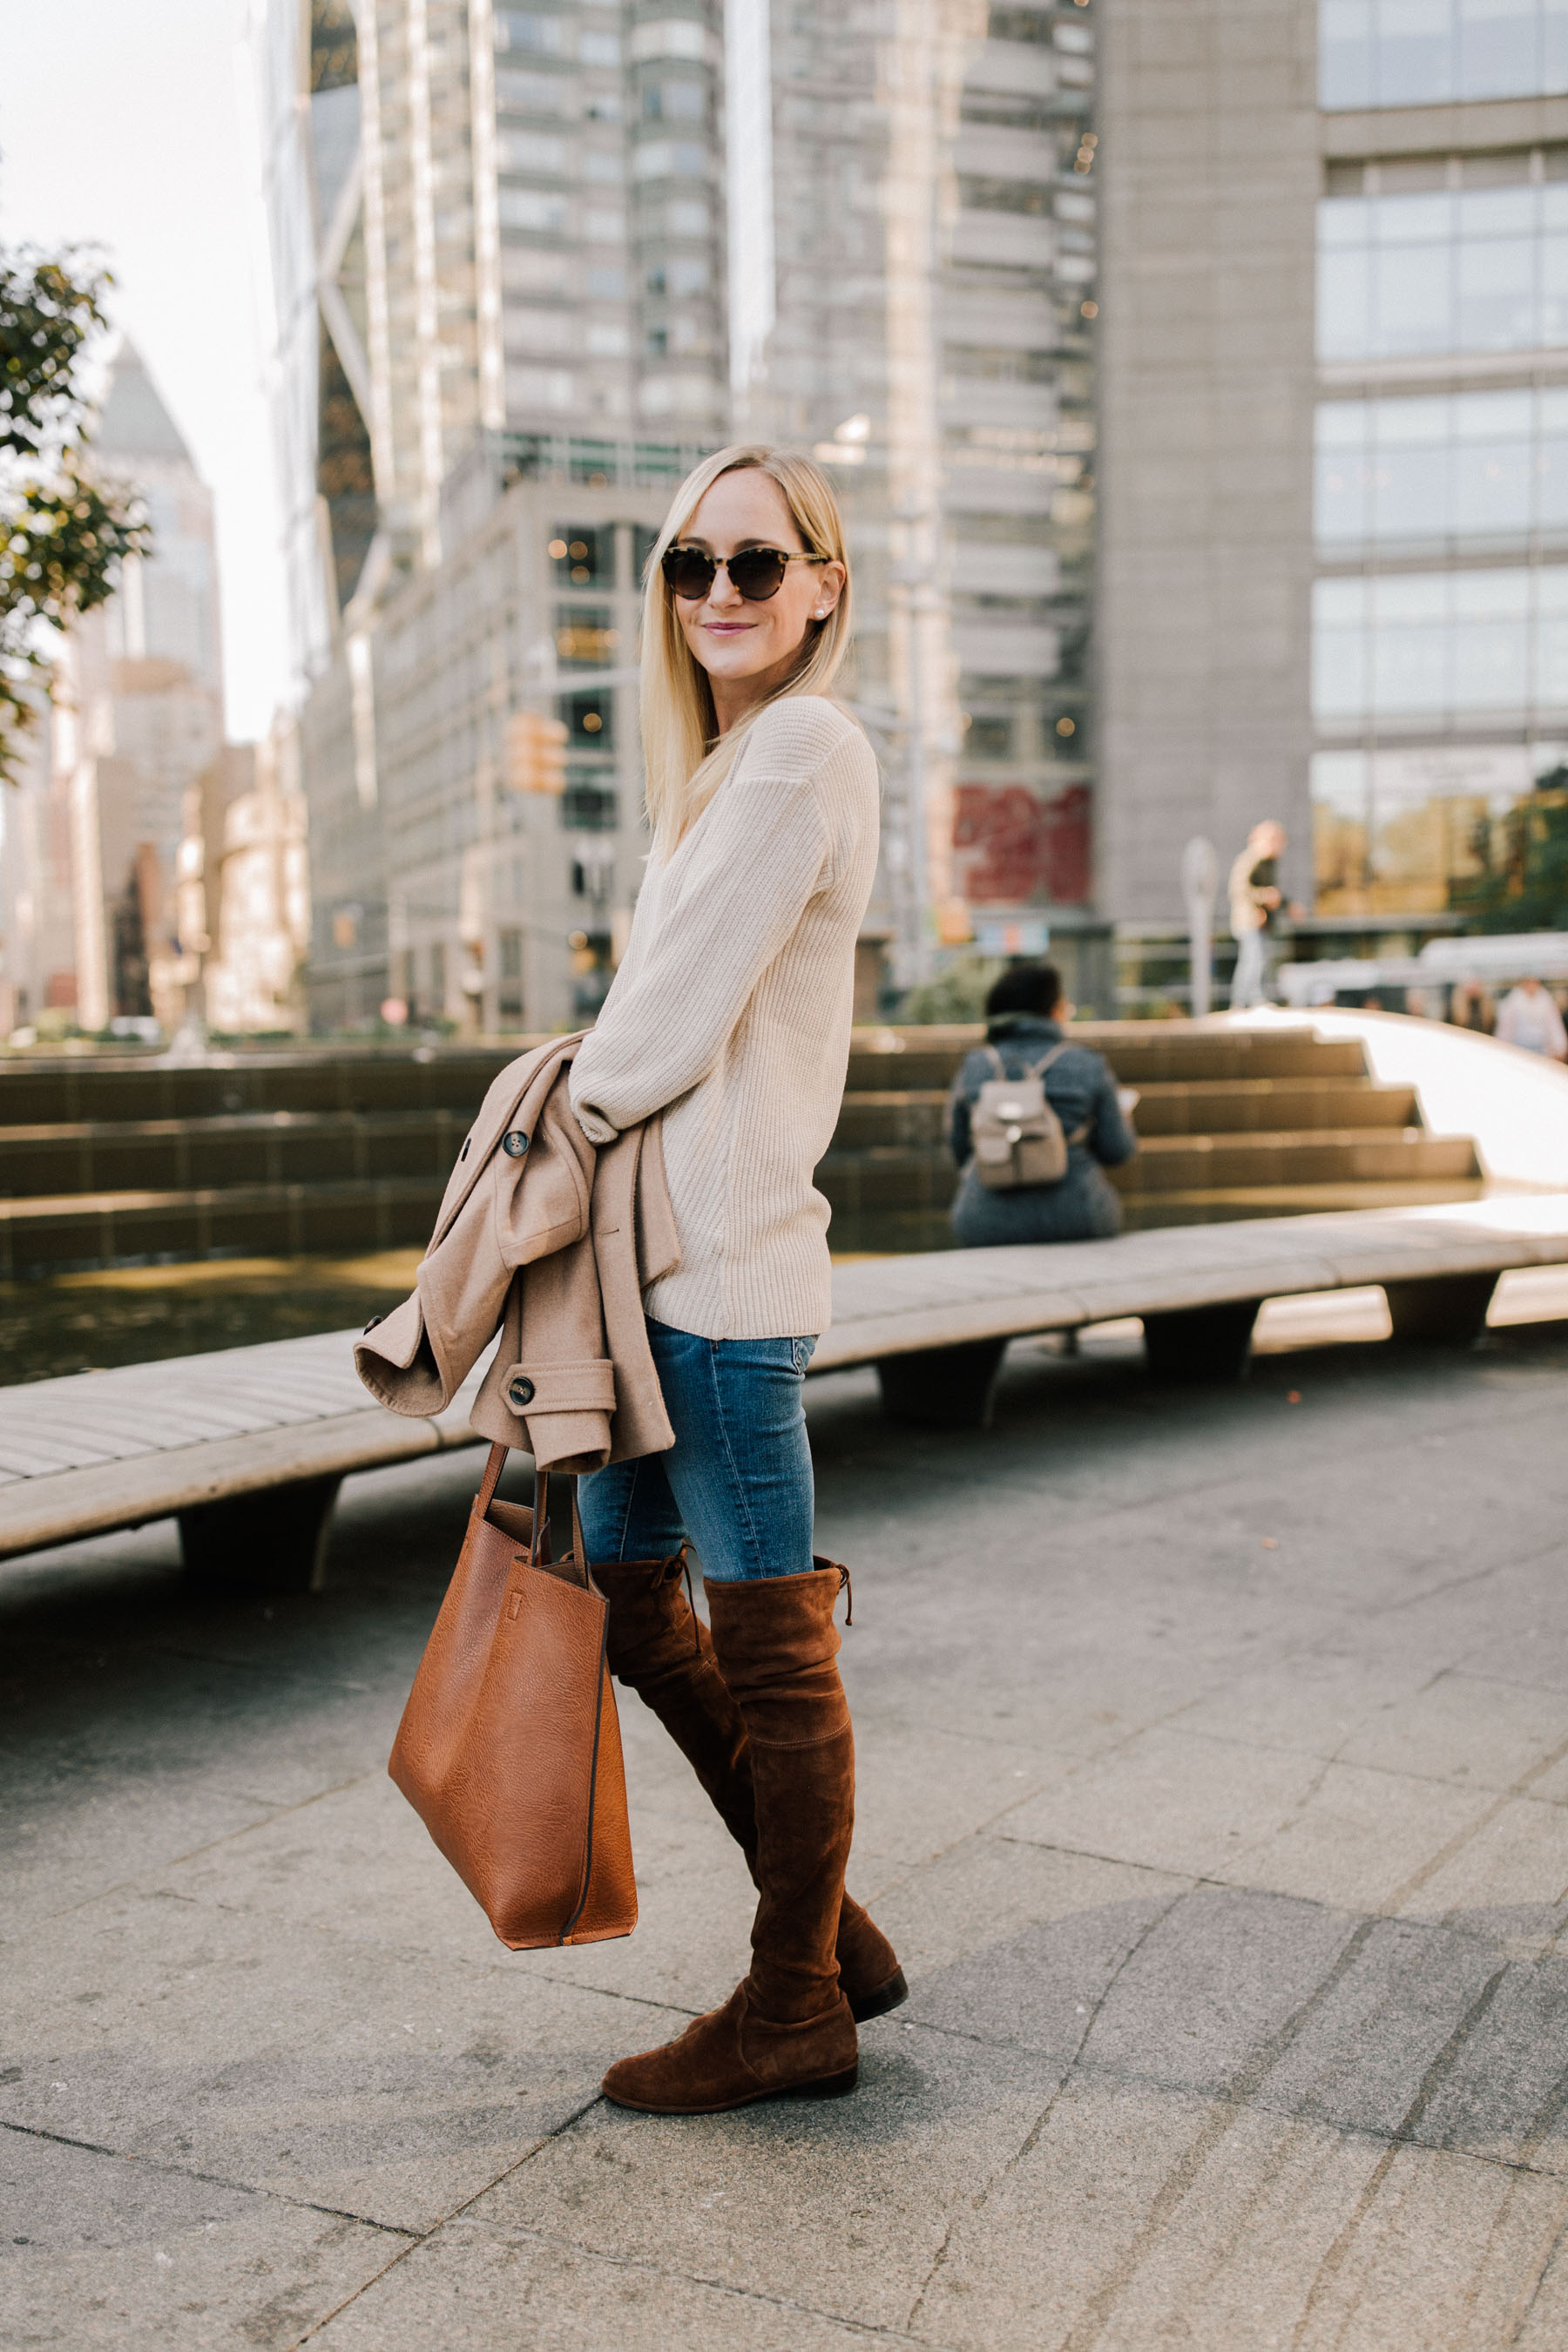 Columbus Circle Outfit - Kelly Larkin of Kelly in the City